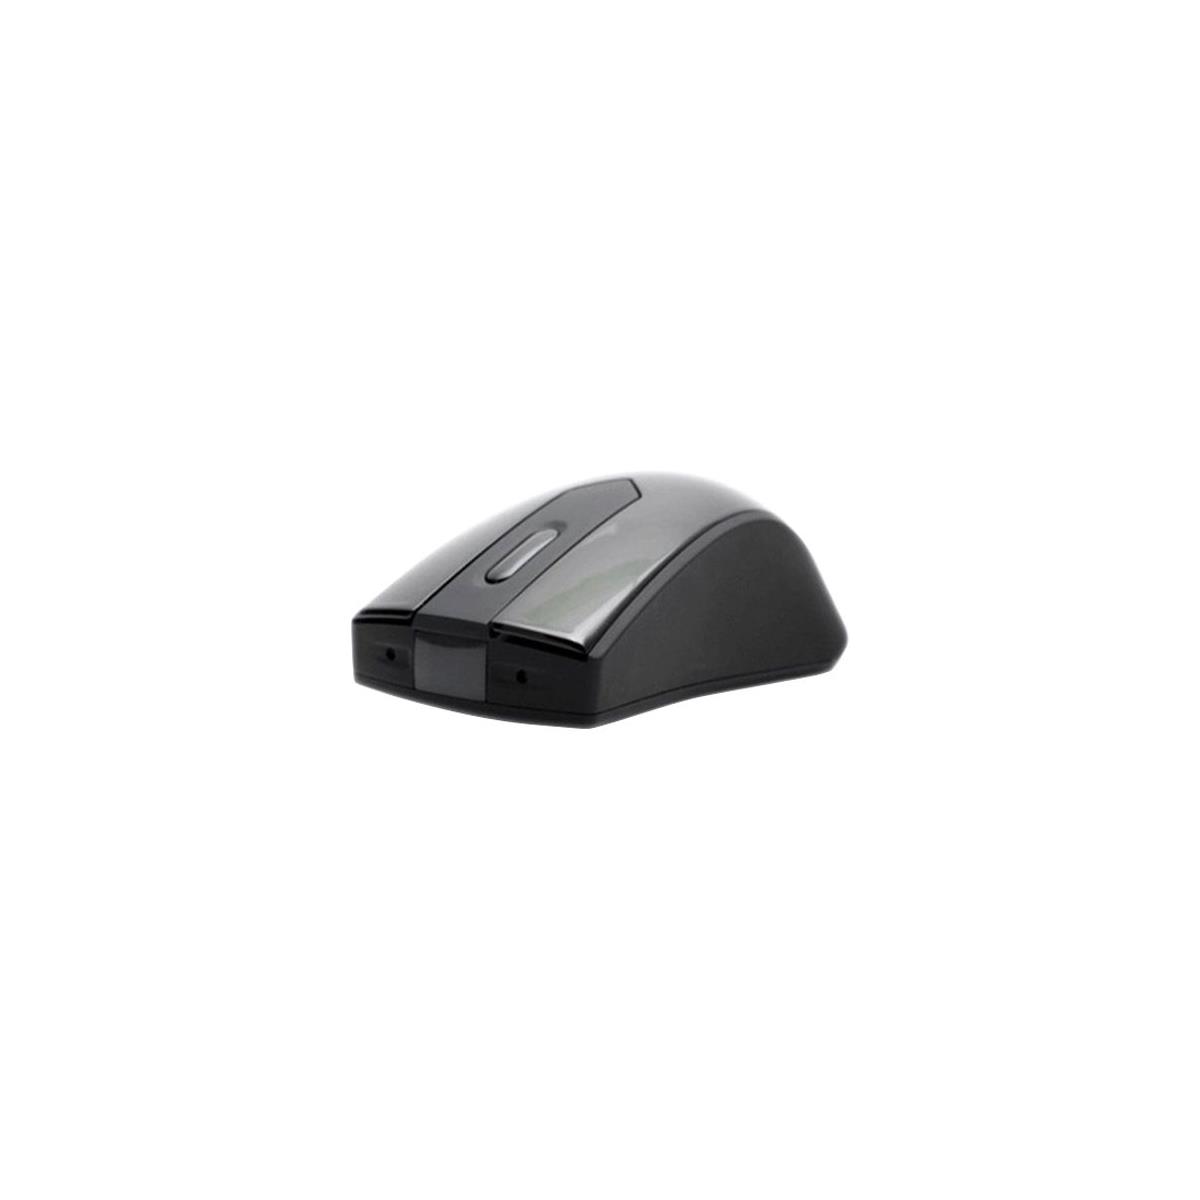 Image of KJB Security Products DVR262 Wireless Mouse Style DVR with 720p Camera